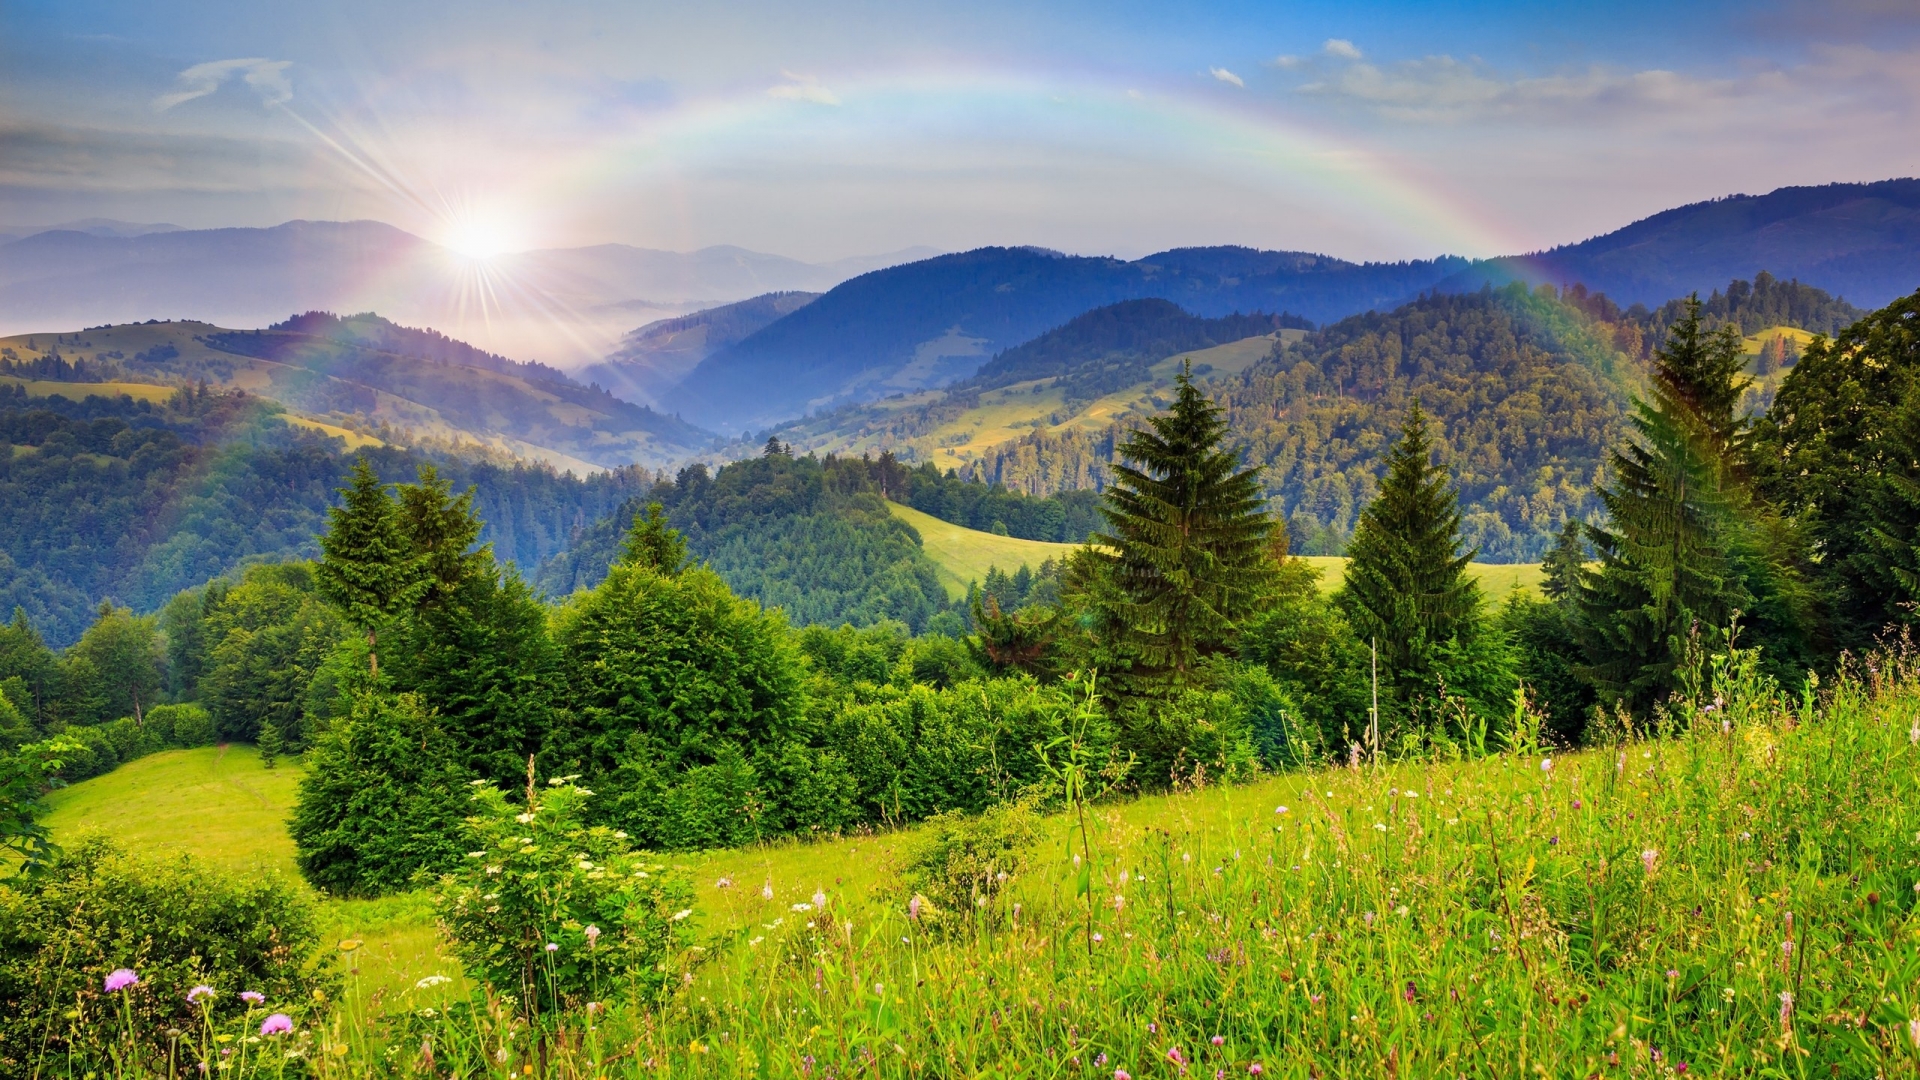 Rainbow Over the Mountains  for 1920 x 1080 HDTV 1080p resolution